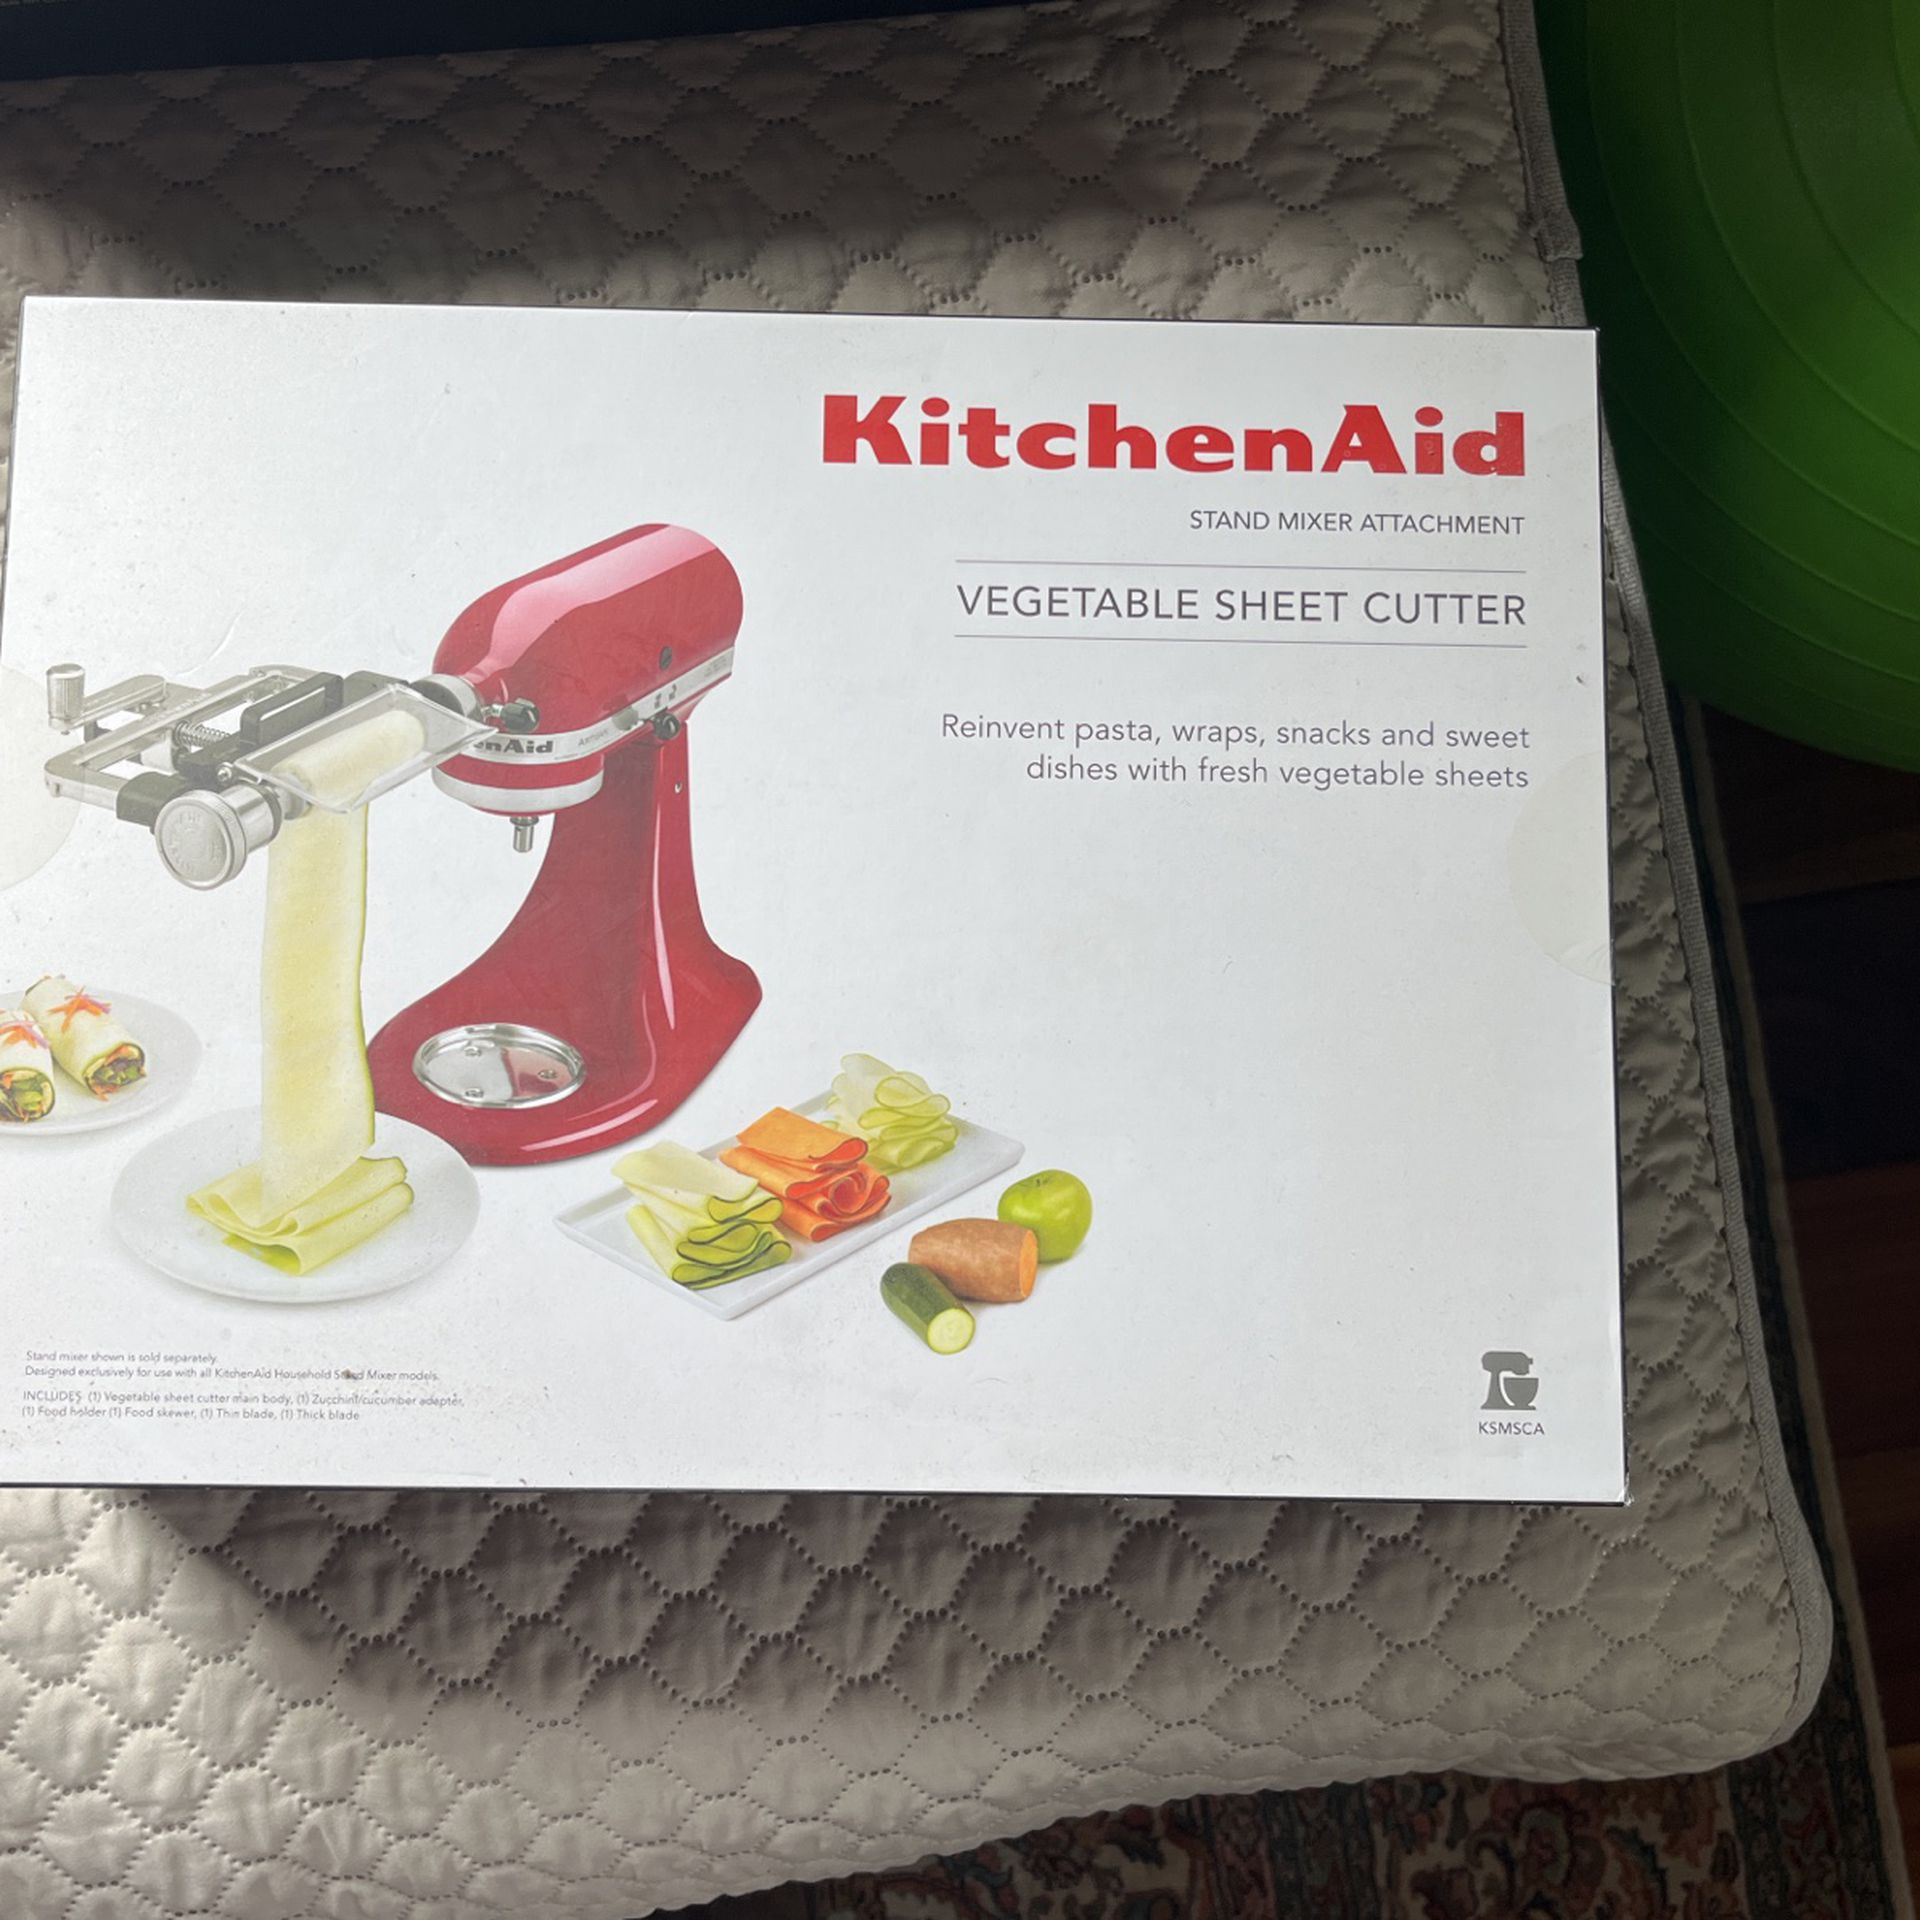 Kitchen Aid Vegetable Sheet Cutter Attachment for Sale in Lakeside